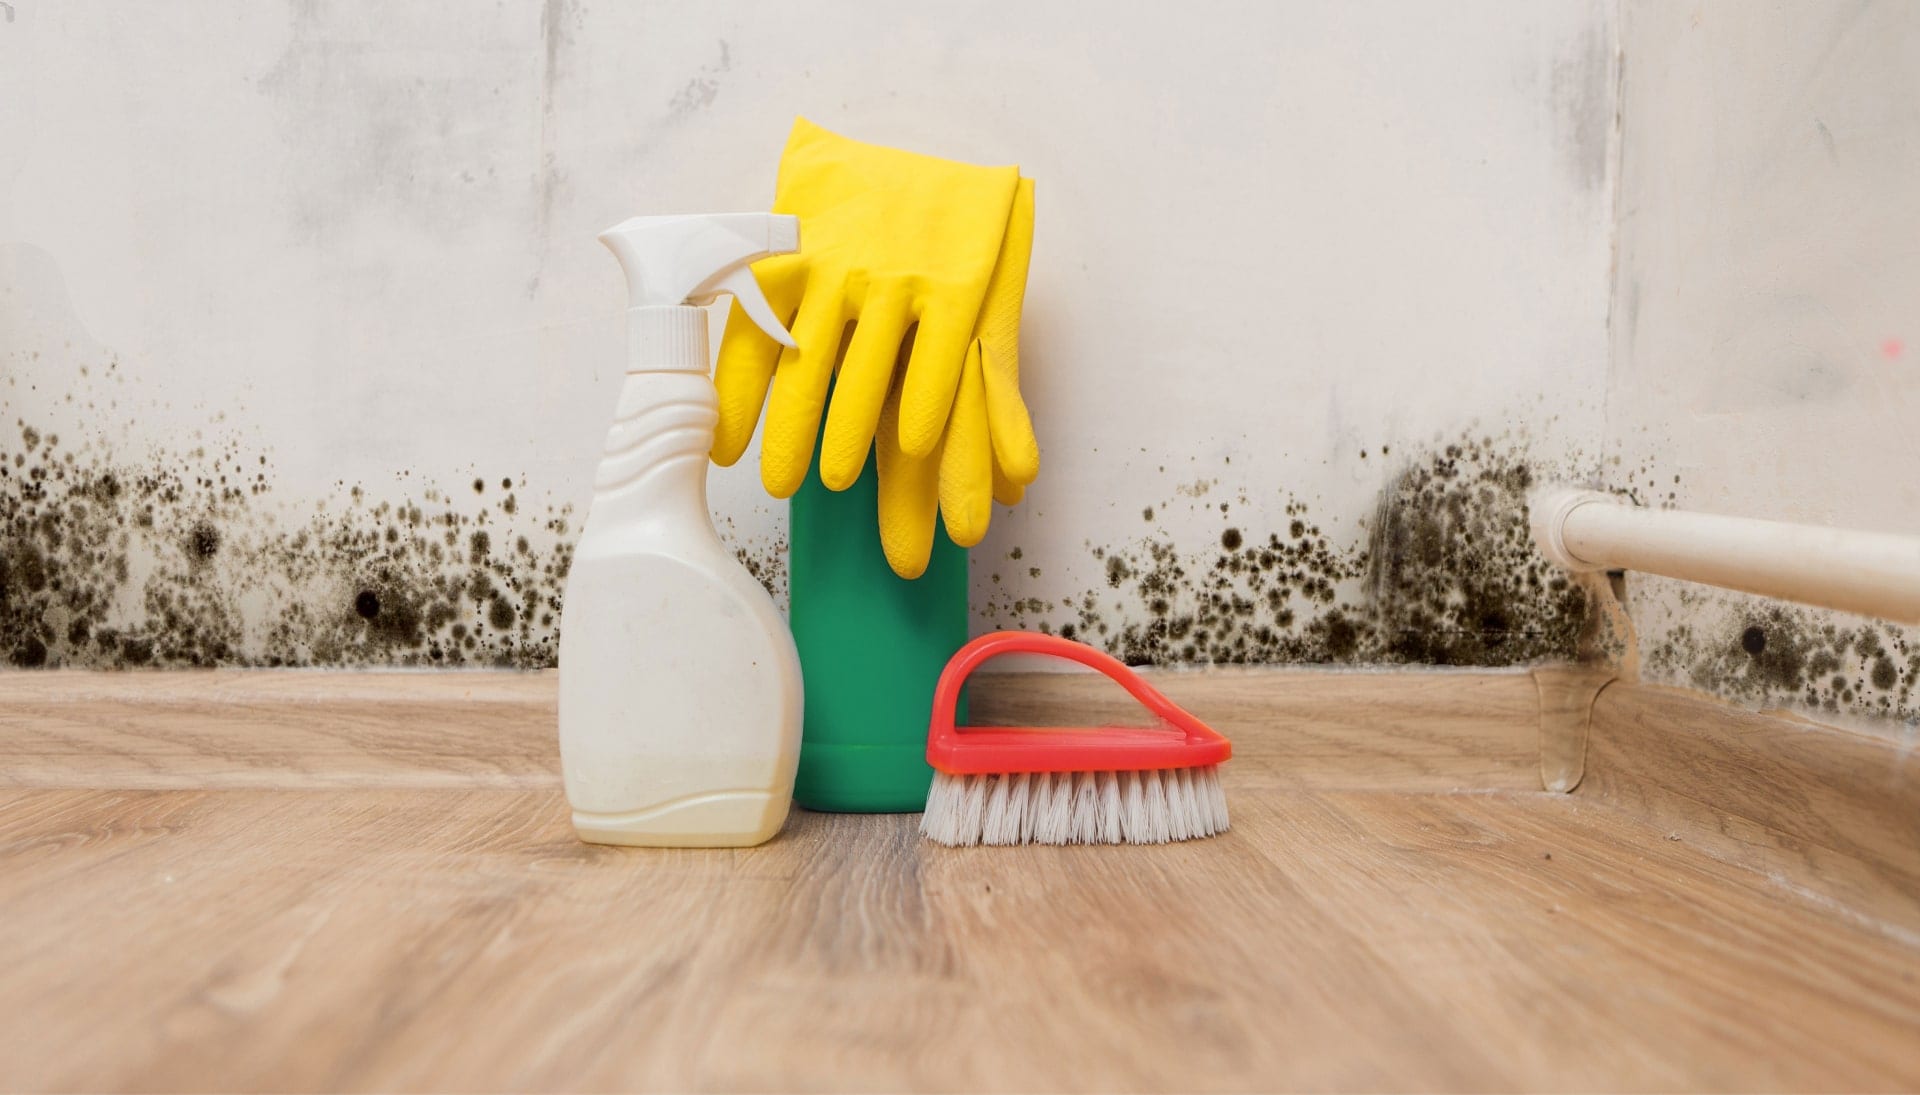 We offer fast and reliable services to help remove and prevent mold growth in your home or business in Gilbert, Arizona